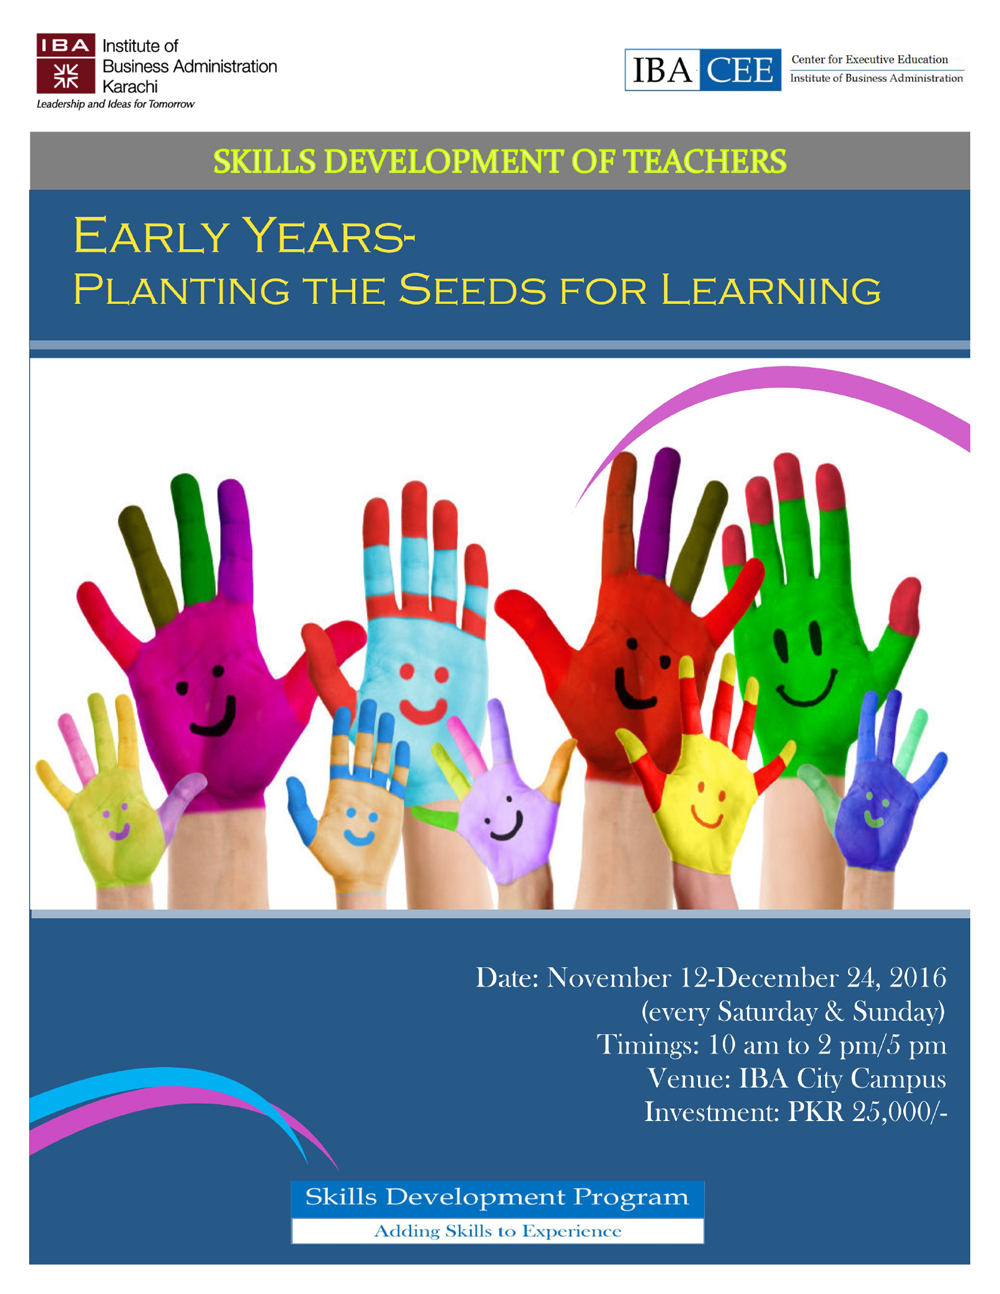 Early Years-Planting the Seeds for Learning